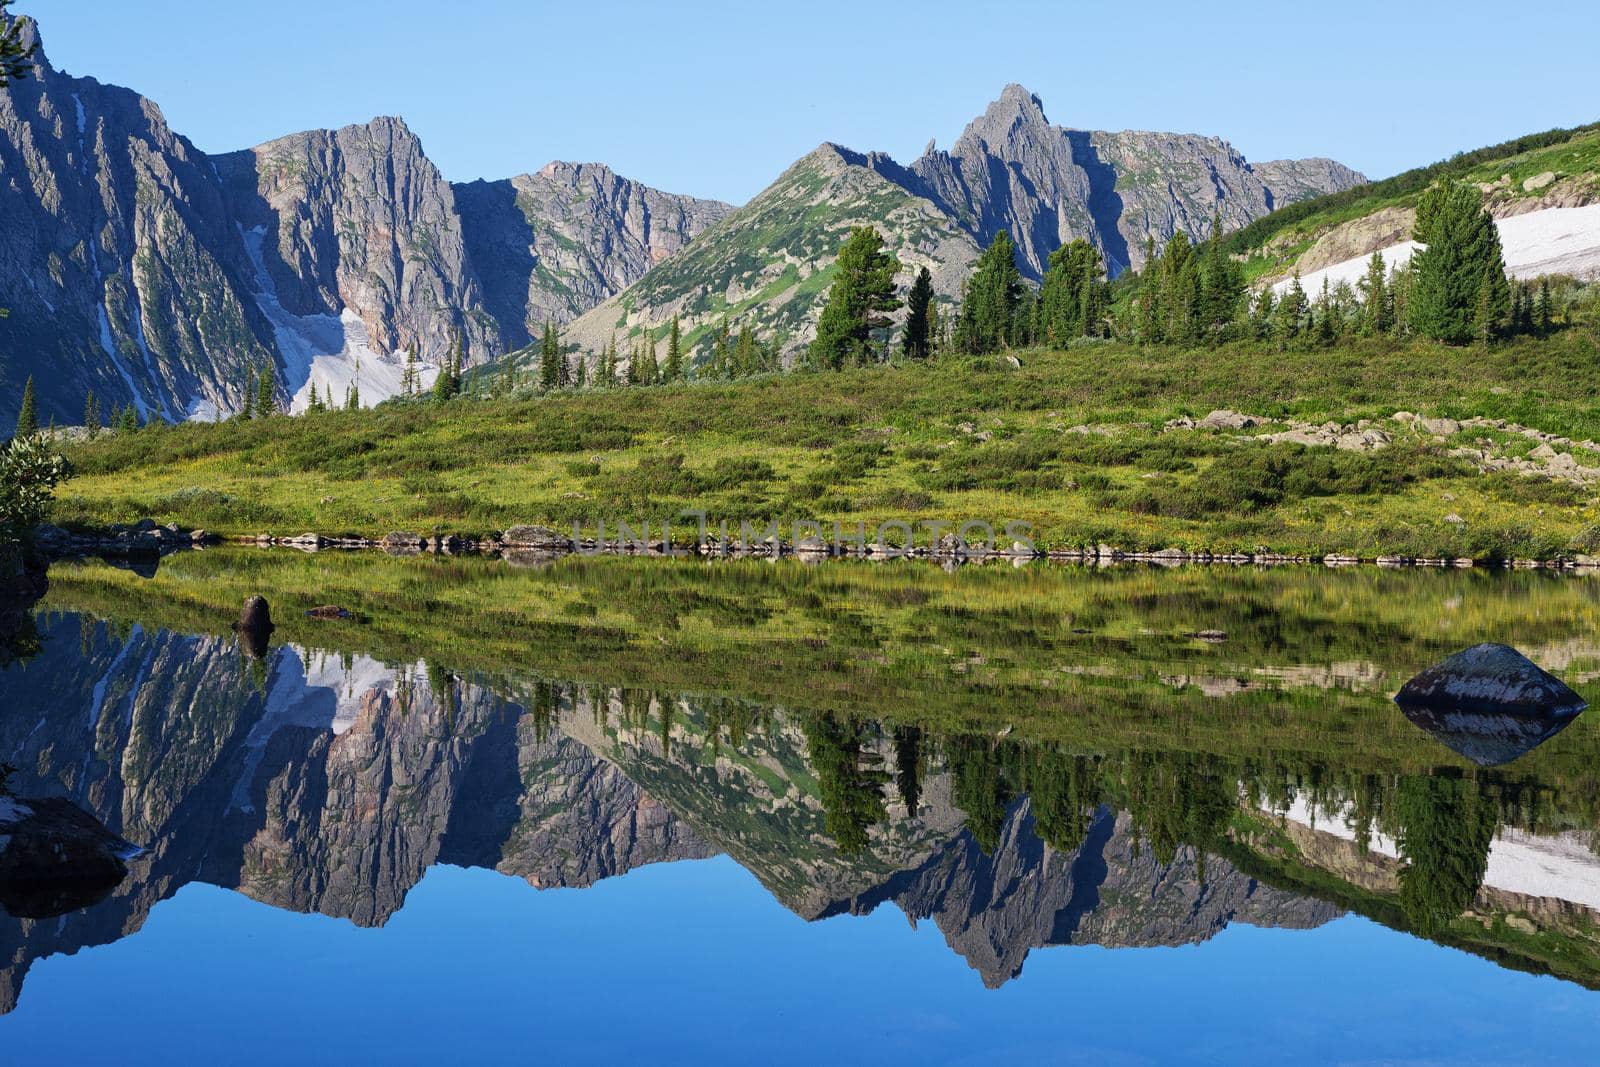 reflection of the mountain on water, mirror image of mountains in water Location: Siberia, the Golden Valley